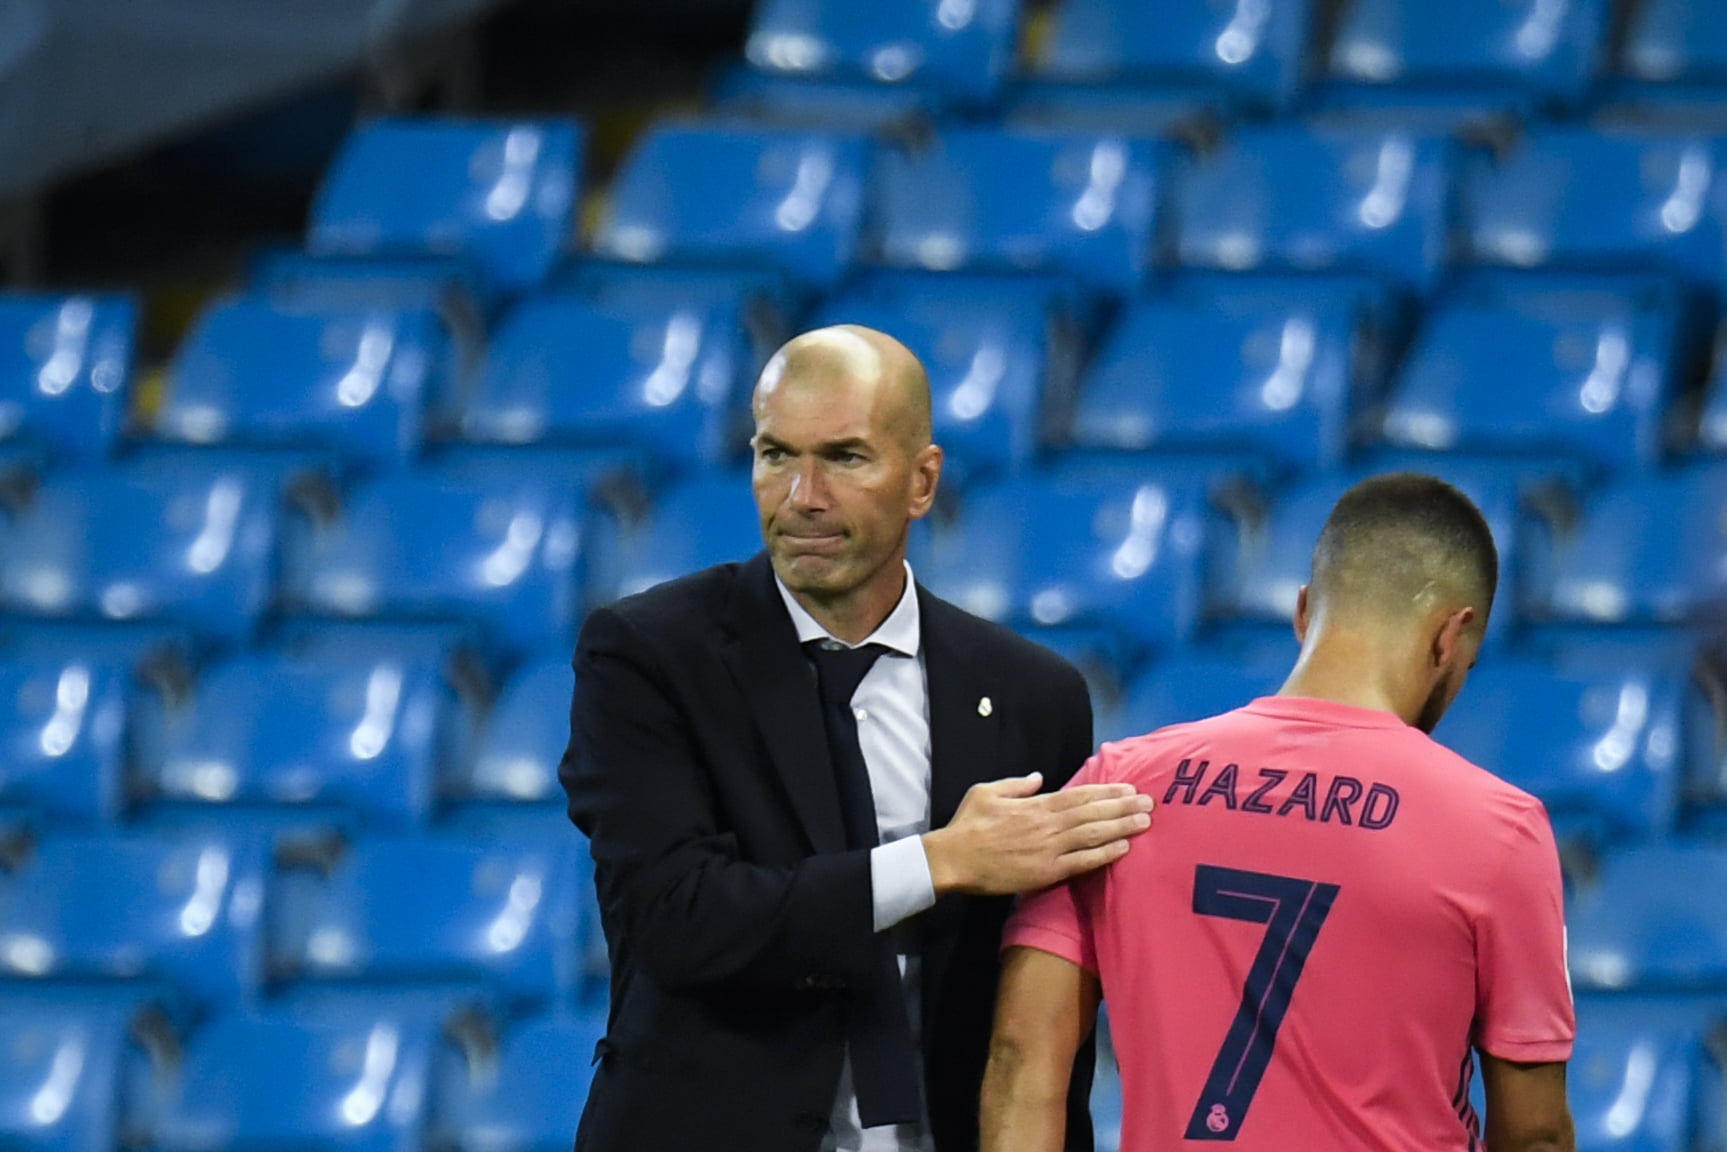 Real Madrid's French coach Zinedine Zidane (L) taps Real Madrid's Belgian forward Eden Hazard as he leaves the pitch after being substituted off during the UEFA Champions League round of 16 second leg football match between Manchester City and Real Madrid at the Etihad Stadium in Manchester, north west England on August 7, 2020. (Photo by PETER POWELL / POOL / AFP) (Photo by PETER POWELL/POOL/AFP via Getty Images)